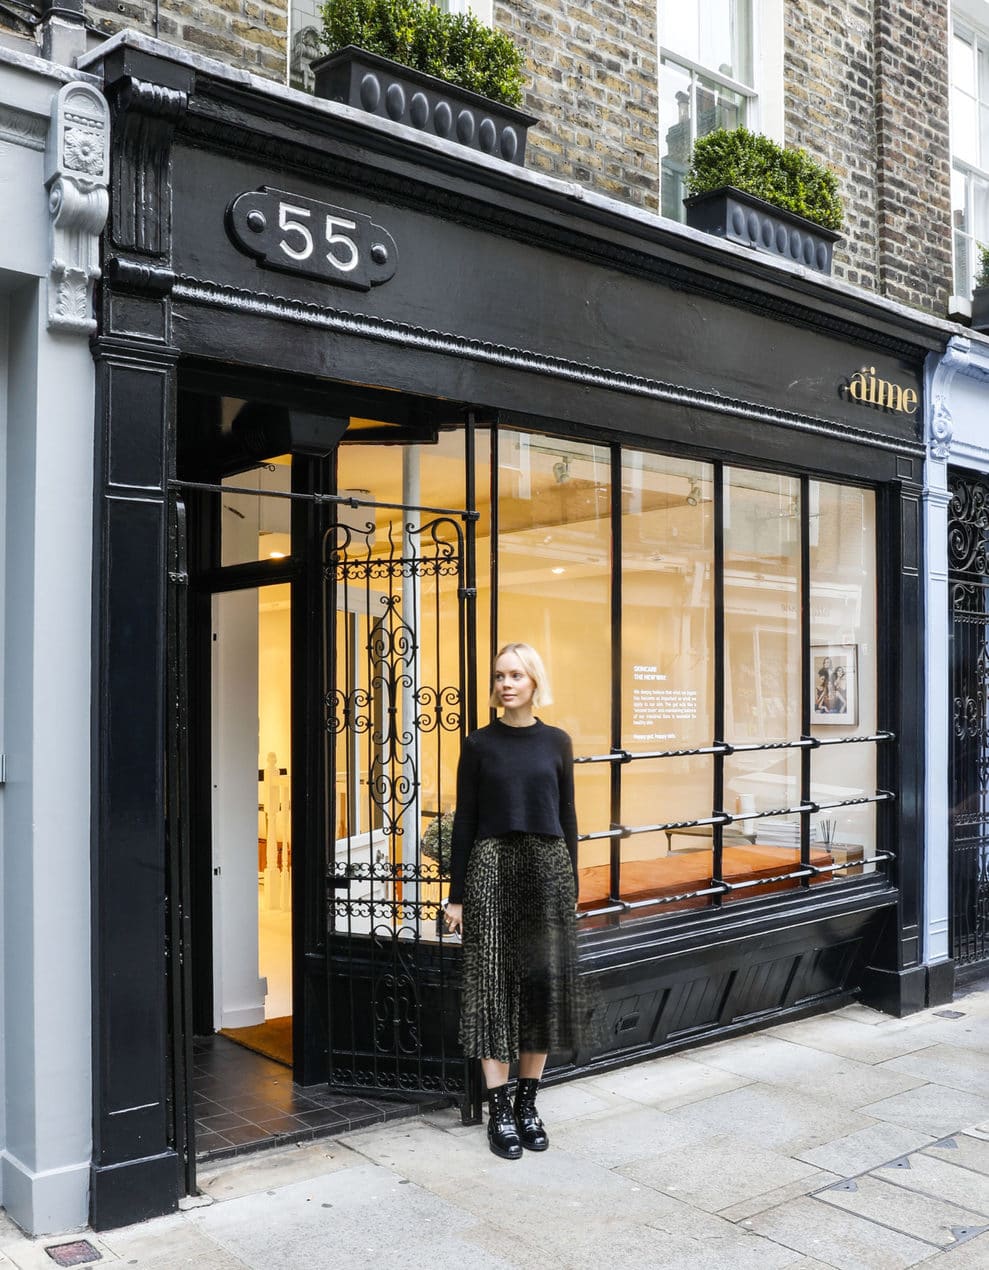 French wellness brand Aime, whose supplements help improve gut health and boost glowing skin, invite you to explore their London boutique